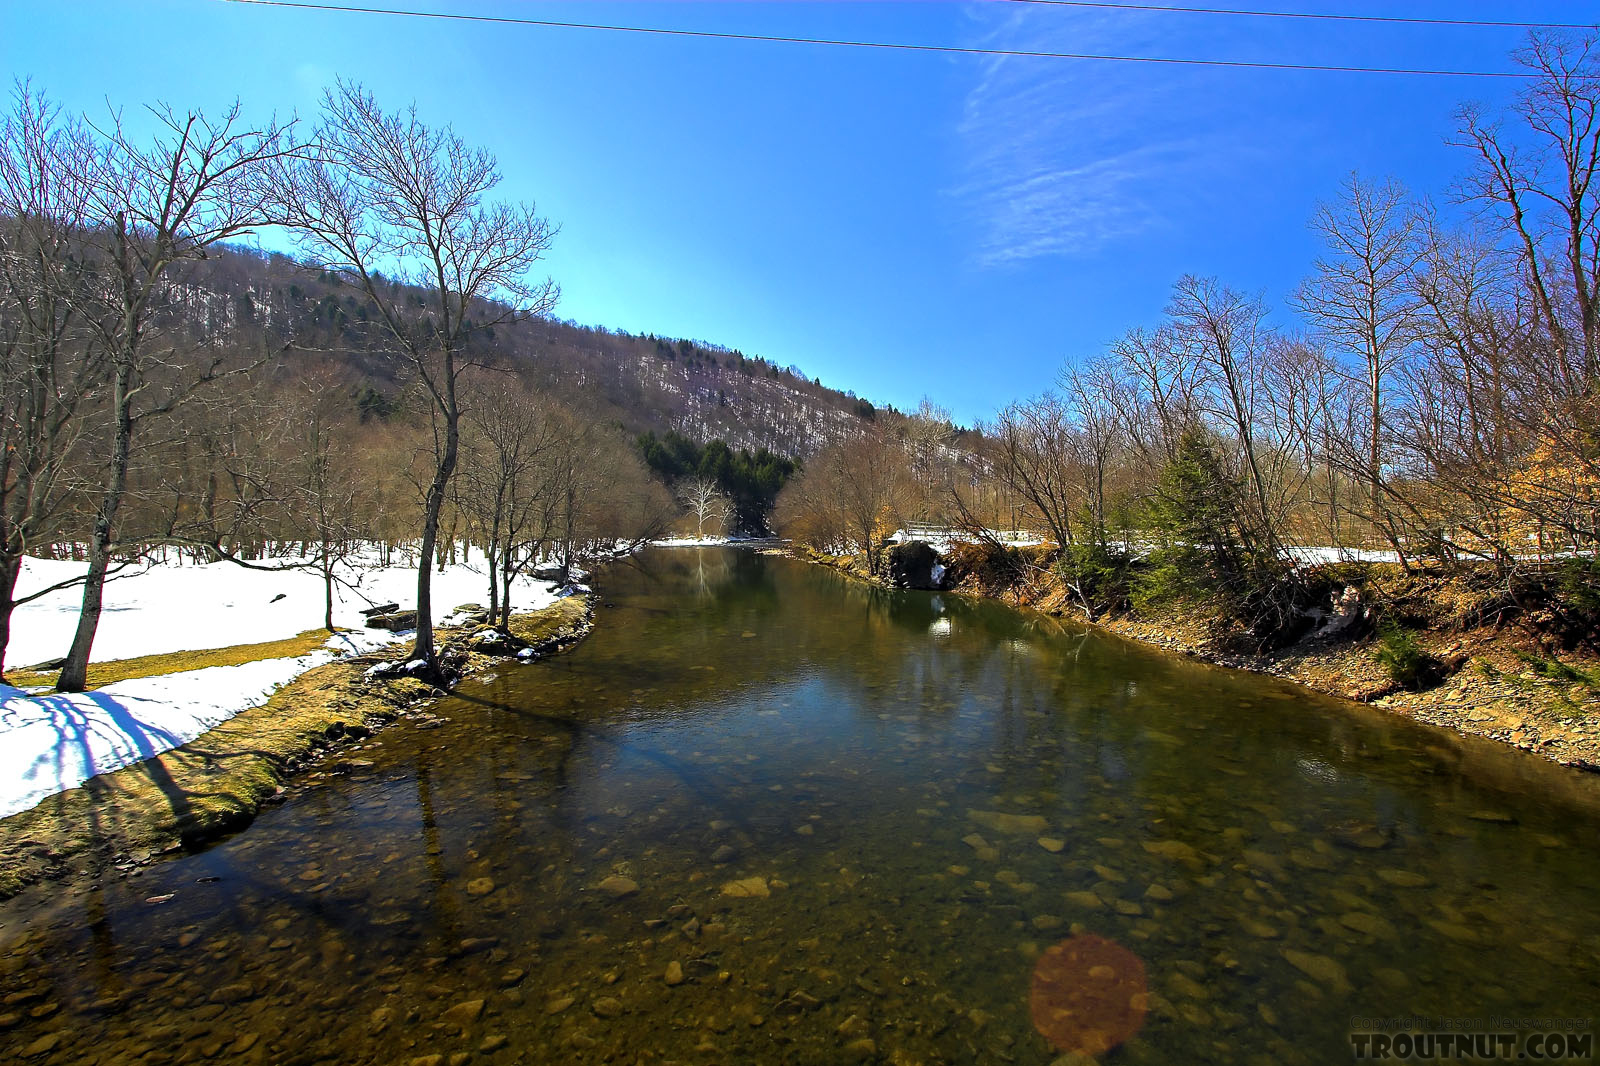 I love how clear the water can be in the Catskills when it hasn't rained for a little while.  A polarizing filter (or sunglasses!) helps, too. From Willowemoc Creek in New York.